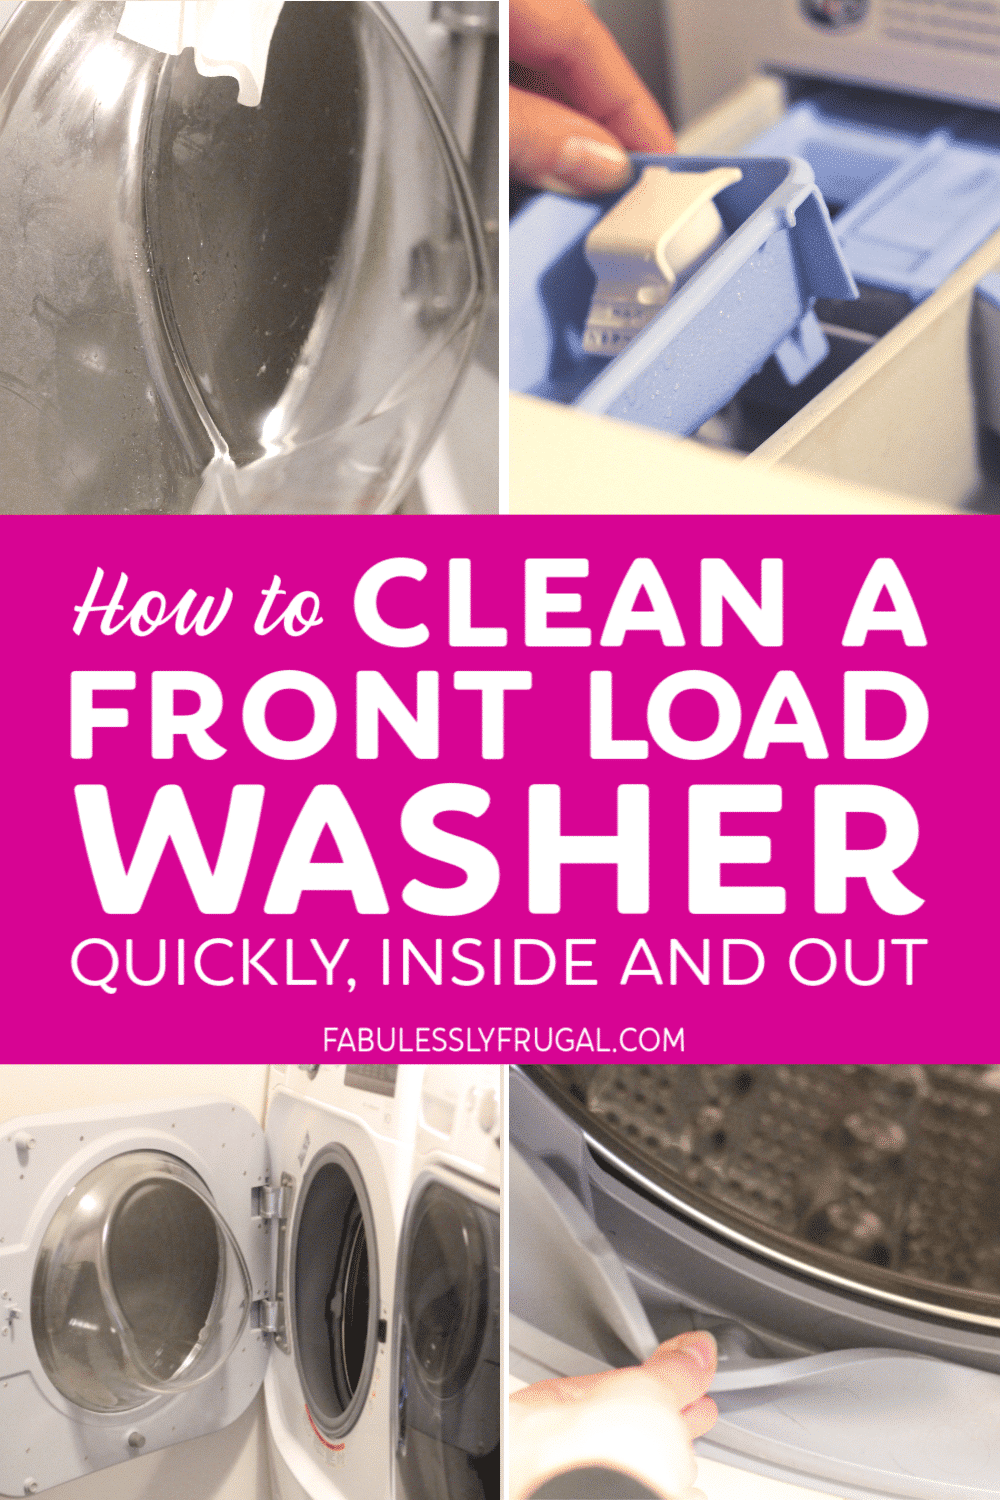 Cleaning front load washer